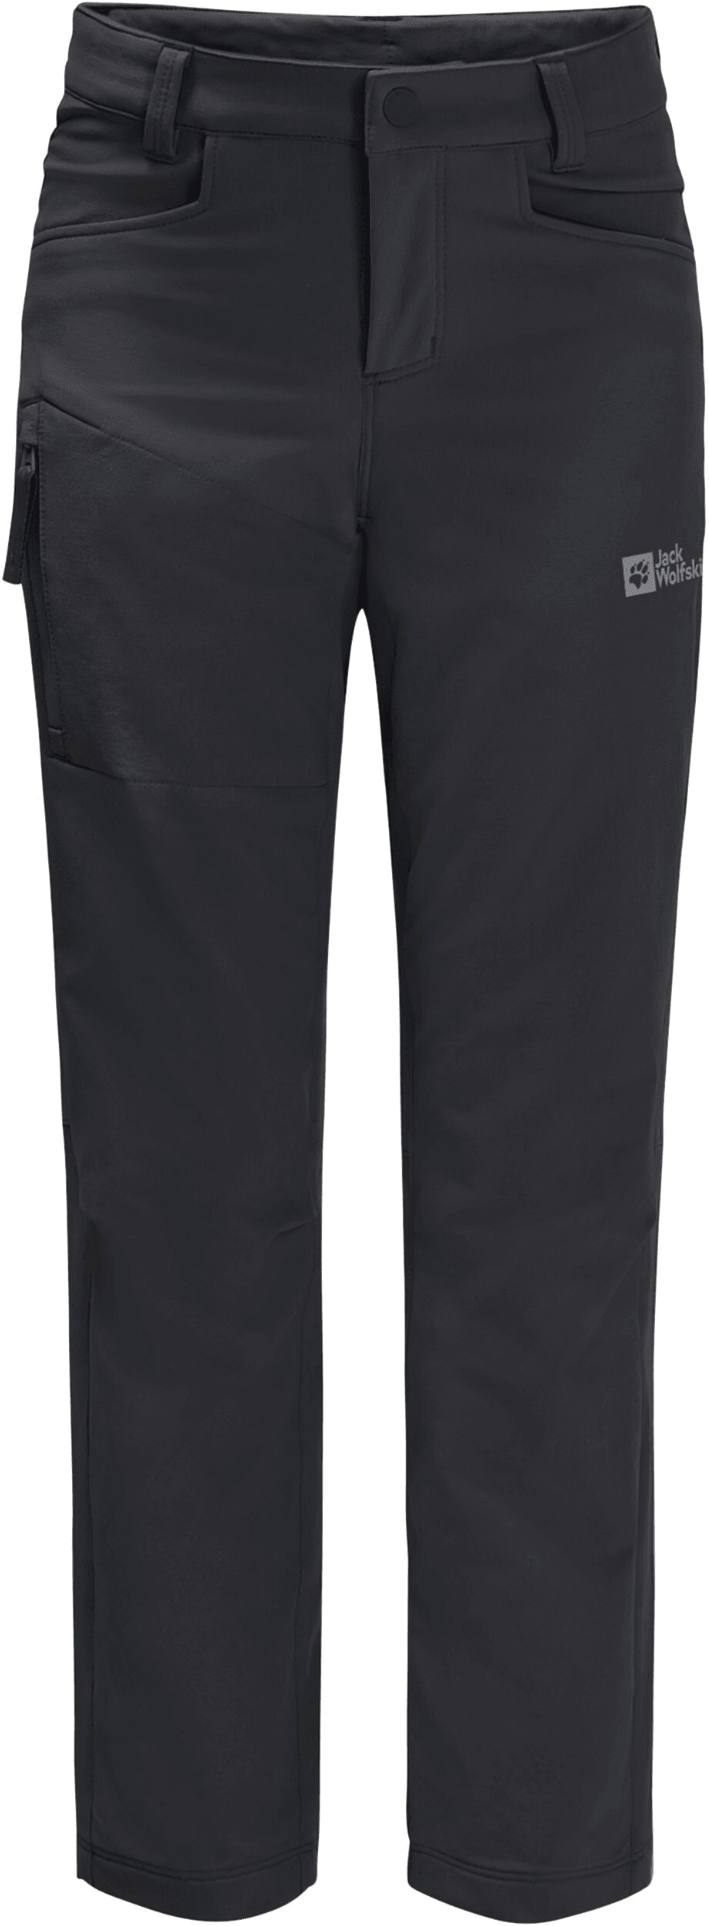 Jack Wolfskin Kid’s Activate Pant